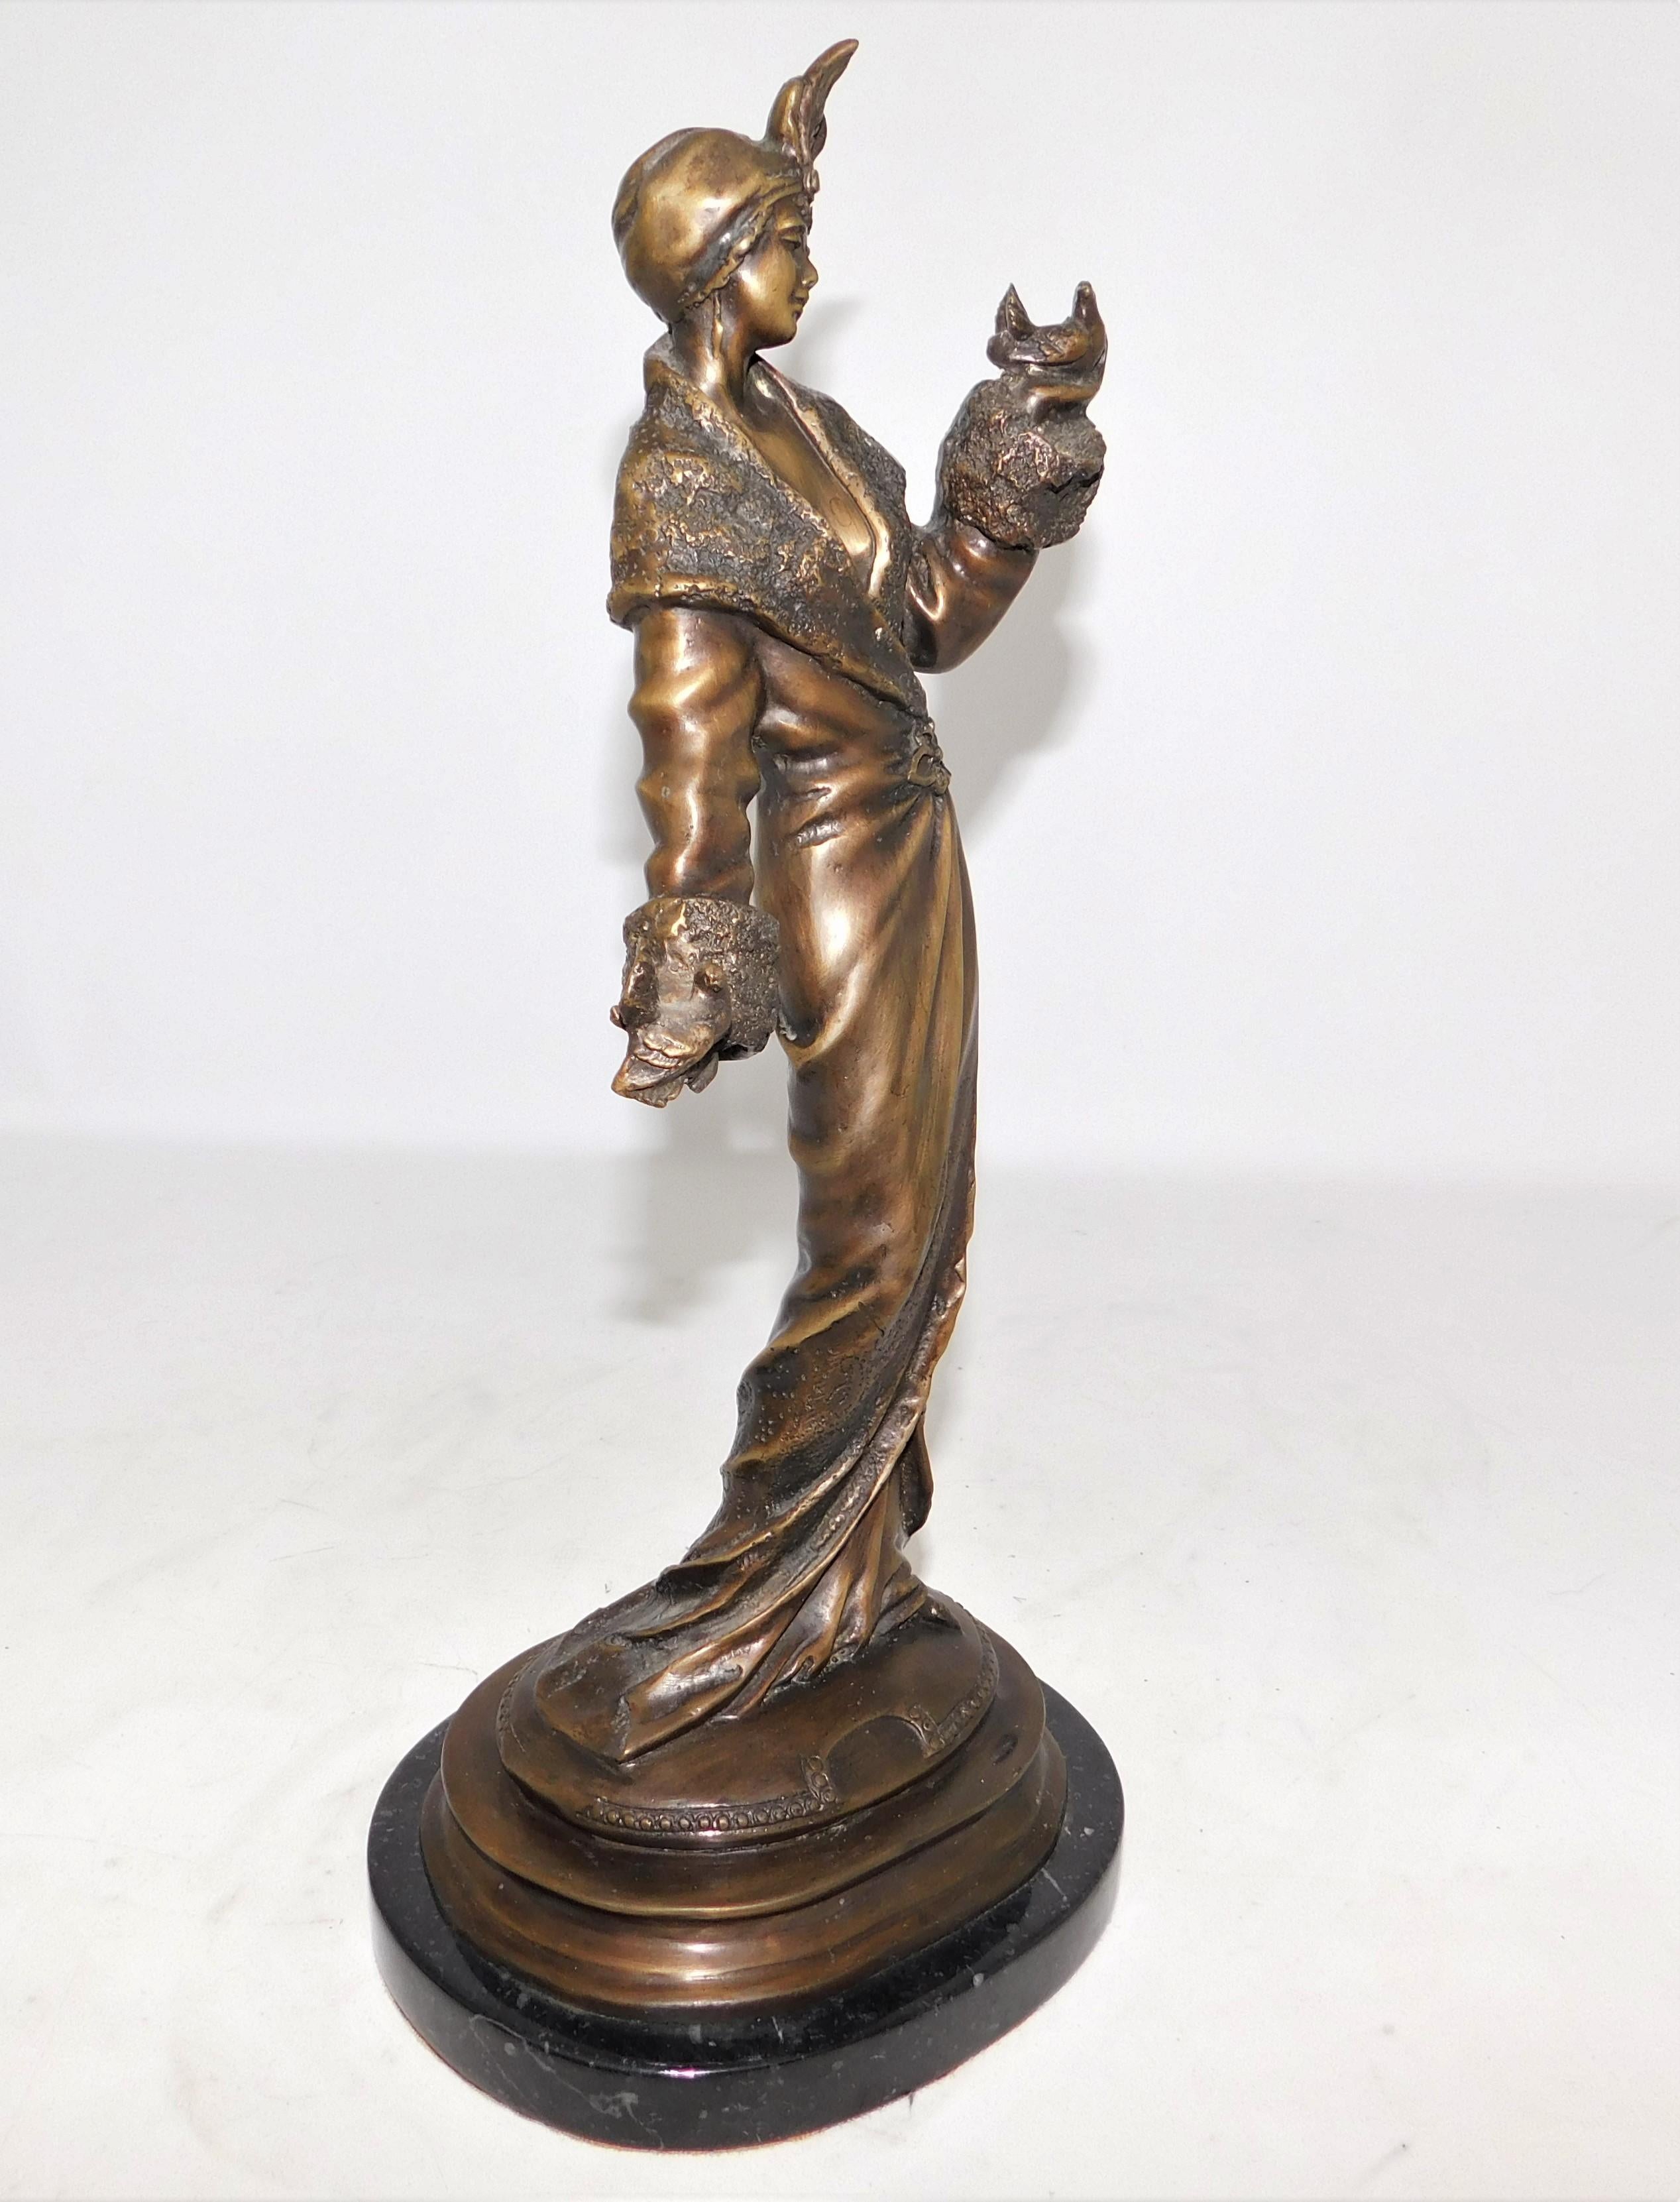 American Bronze Art Deco Figurine Sculpture Woman with Doves in Flowing Dress on Marble For Sale